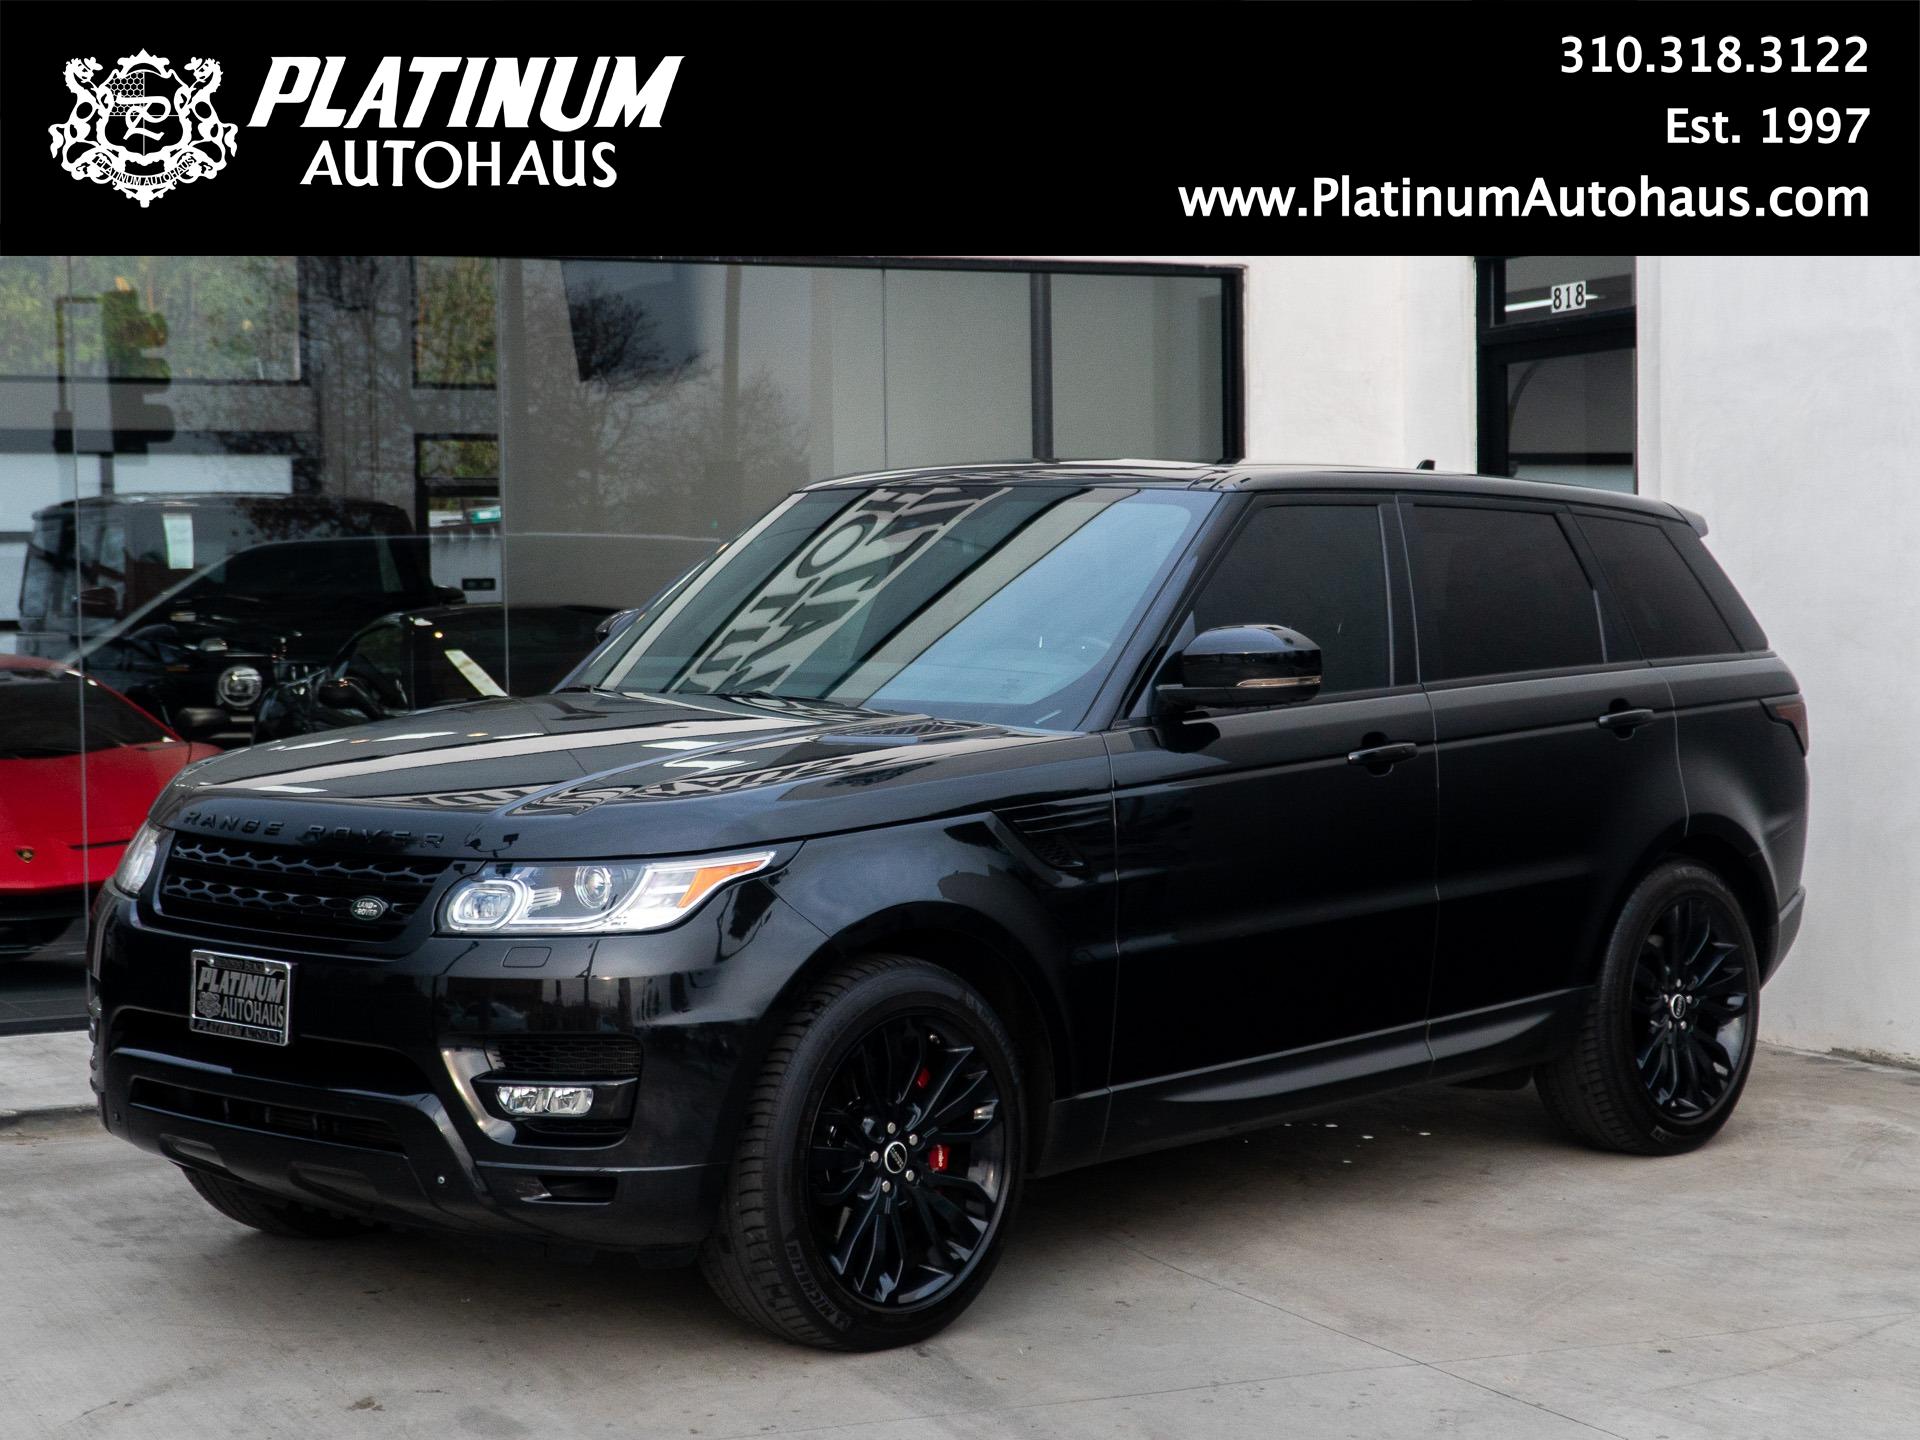 Haiku gewoon Immoraliteit 2015 Land Rover Range Rover Sport Supercharged Limited Edition Stock # 6779  for sale near Redondo Beach, CA | CA Land Rover Dealer